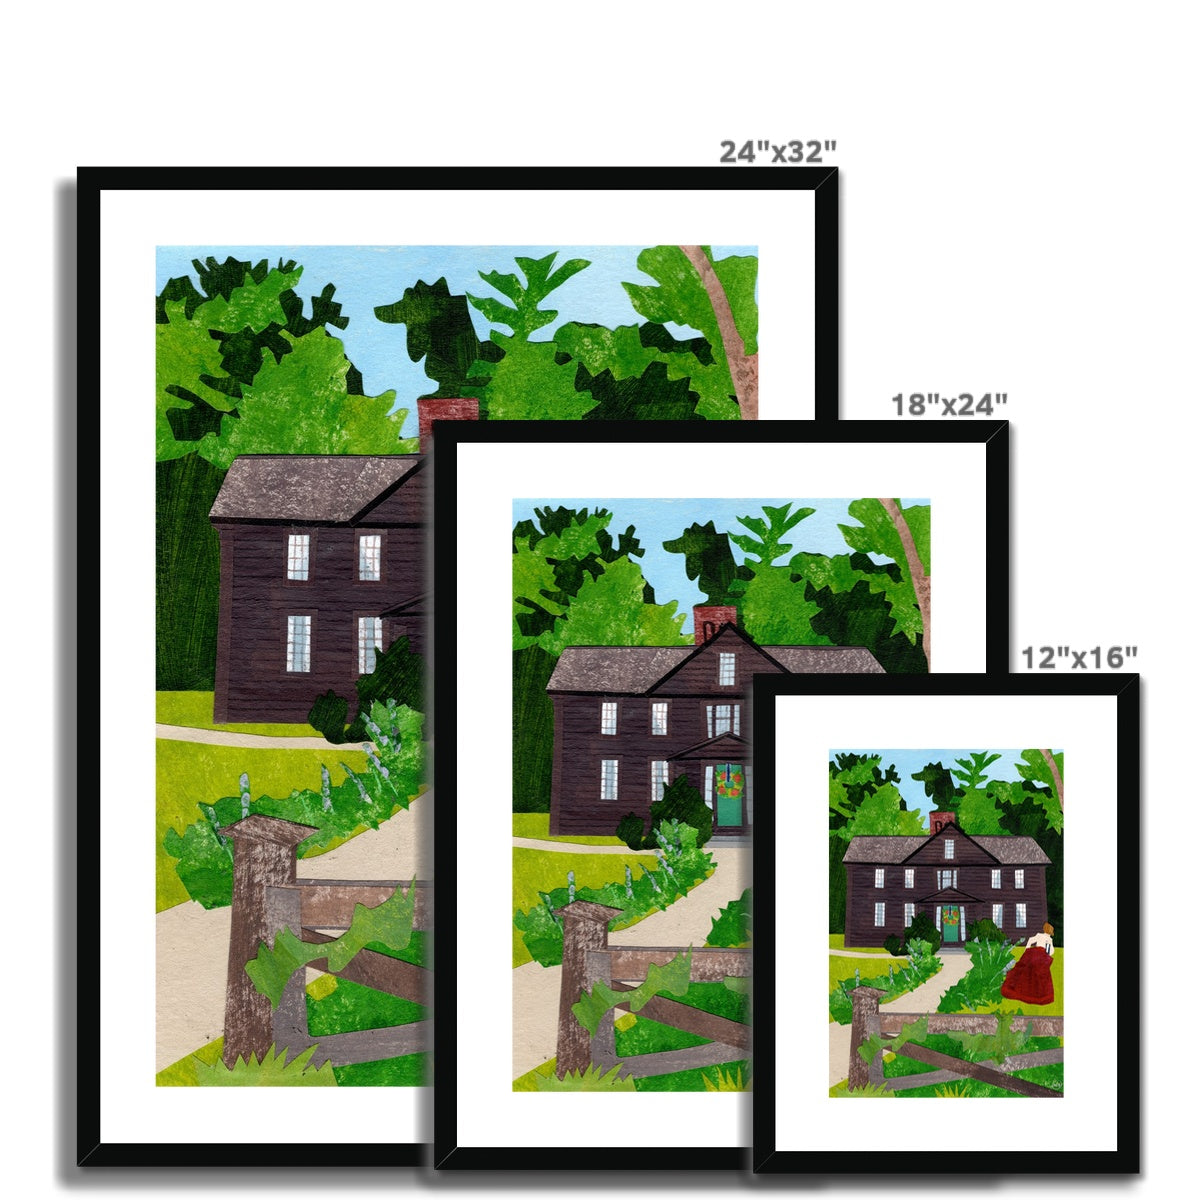 Orchard House Framed & Matted Print